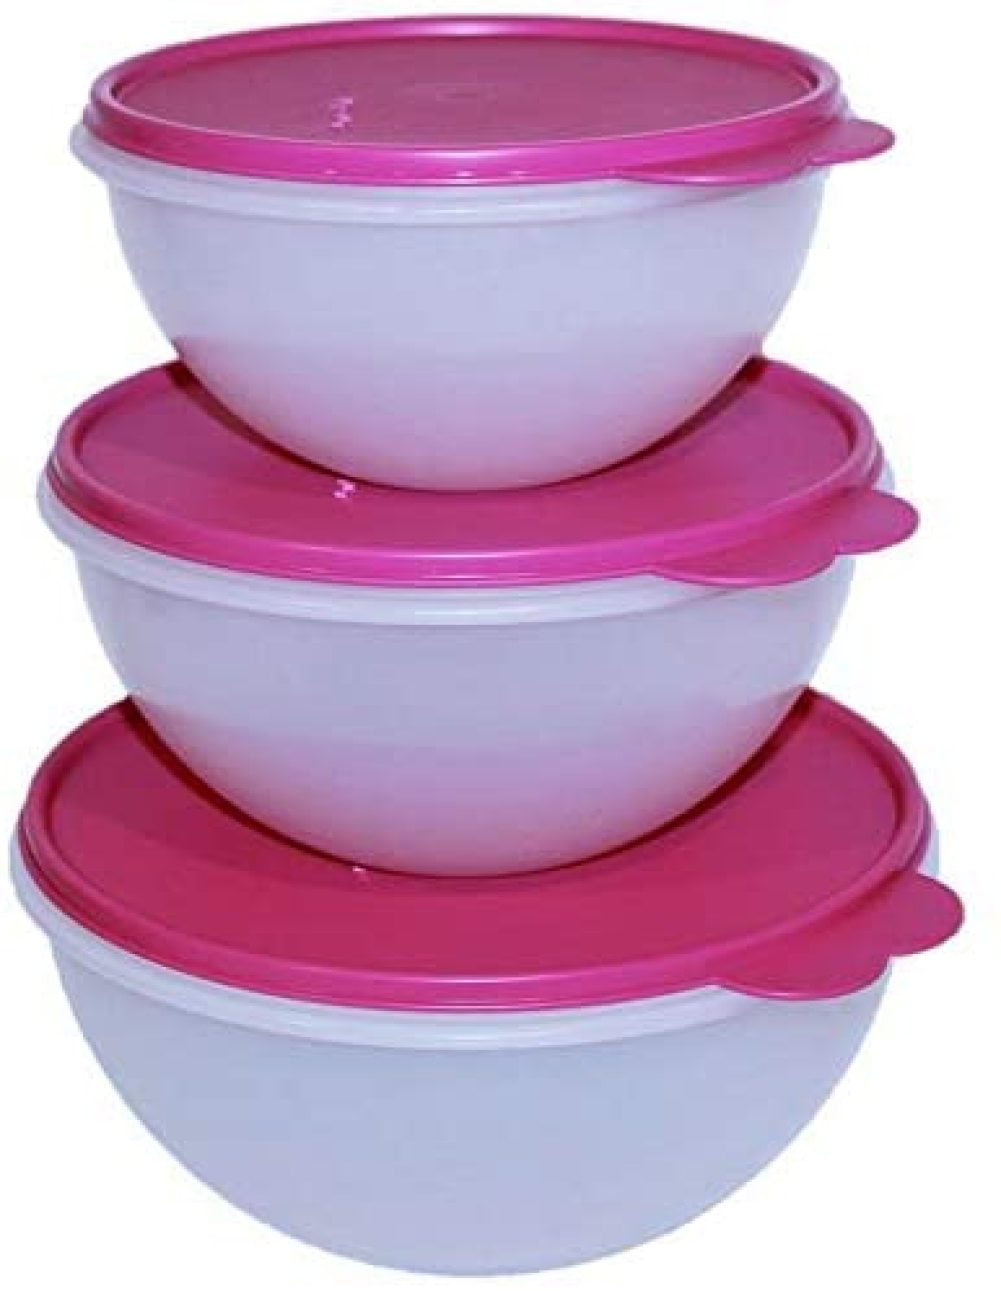 Details about   Tupperware Wonderlier Mixing Bowl Red 12 Cups Small Salad Bowl New 